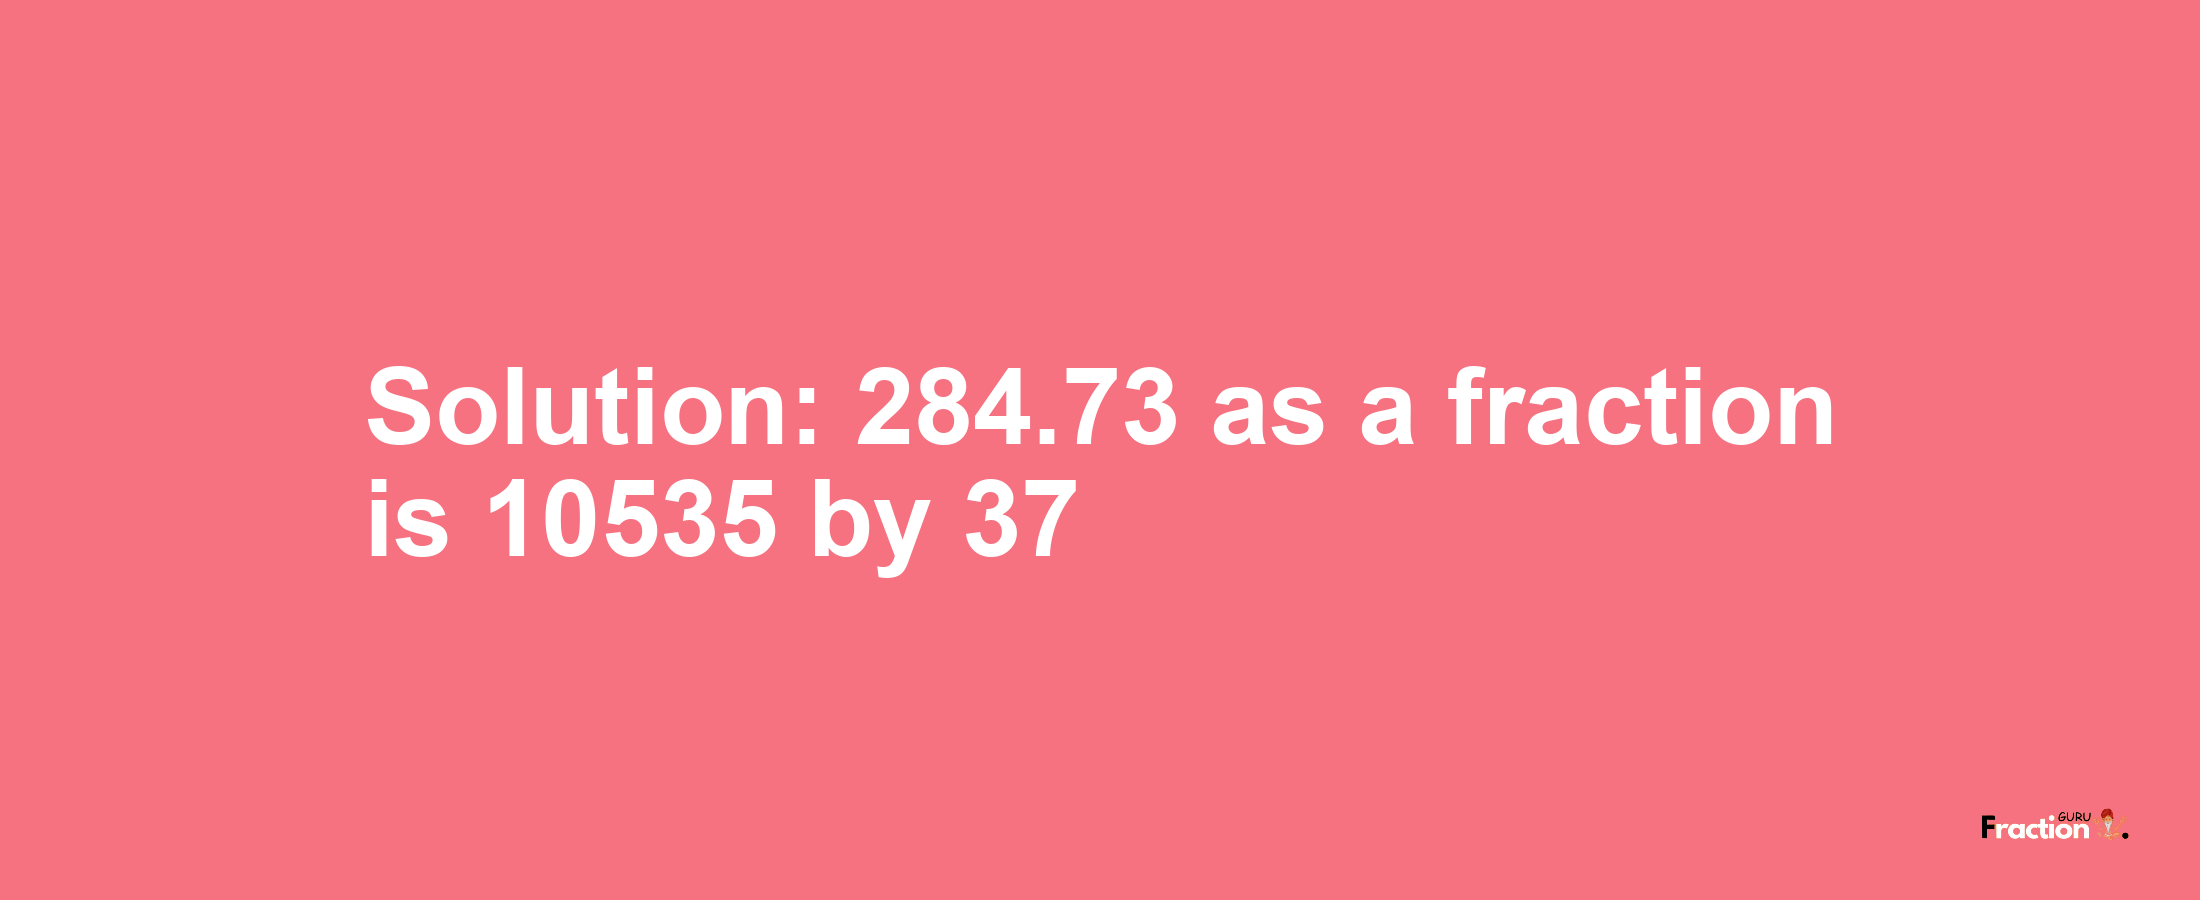 Solution:284.73 as a fraction is 10535/37